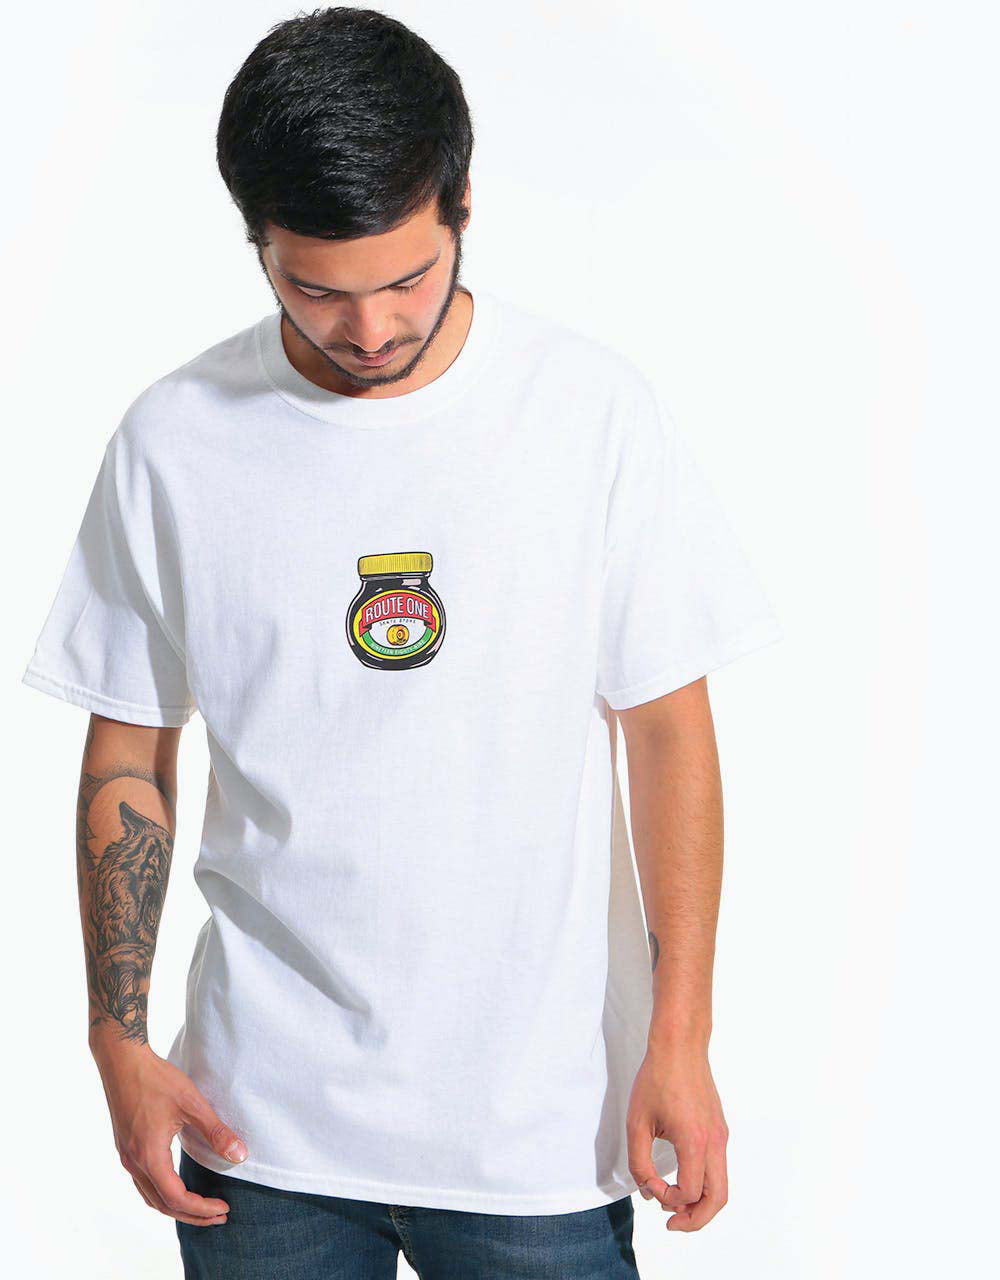 Route One Love It T-Shirt - White